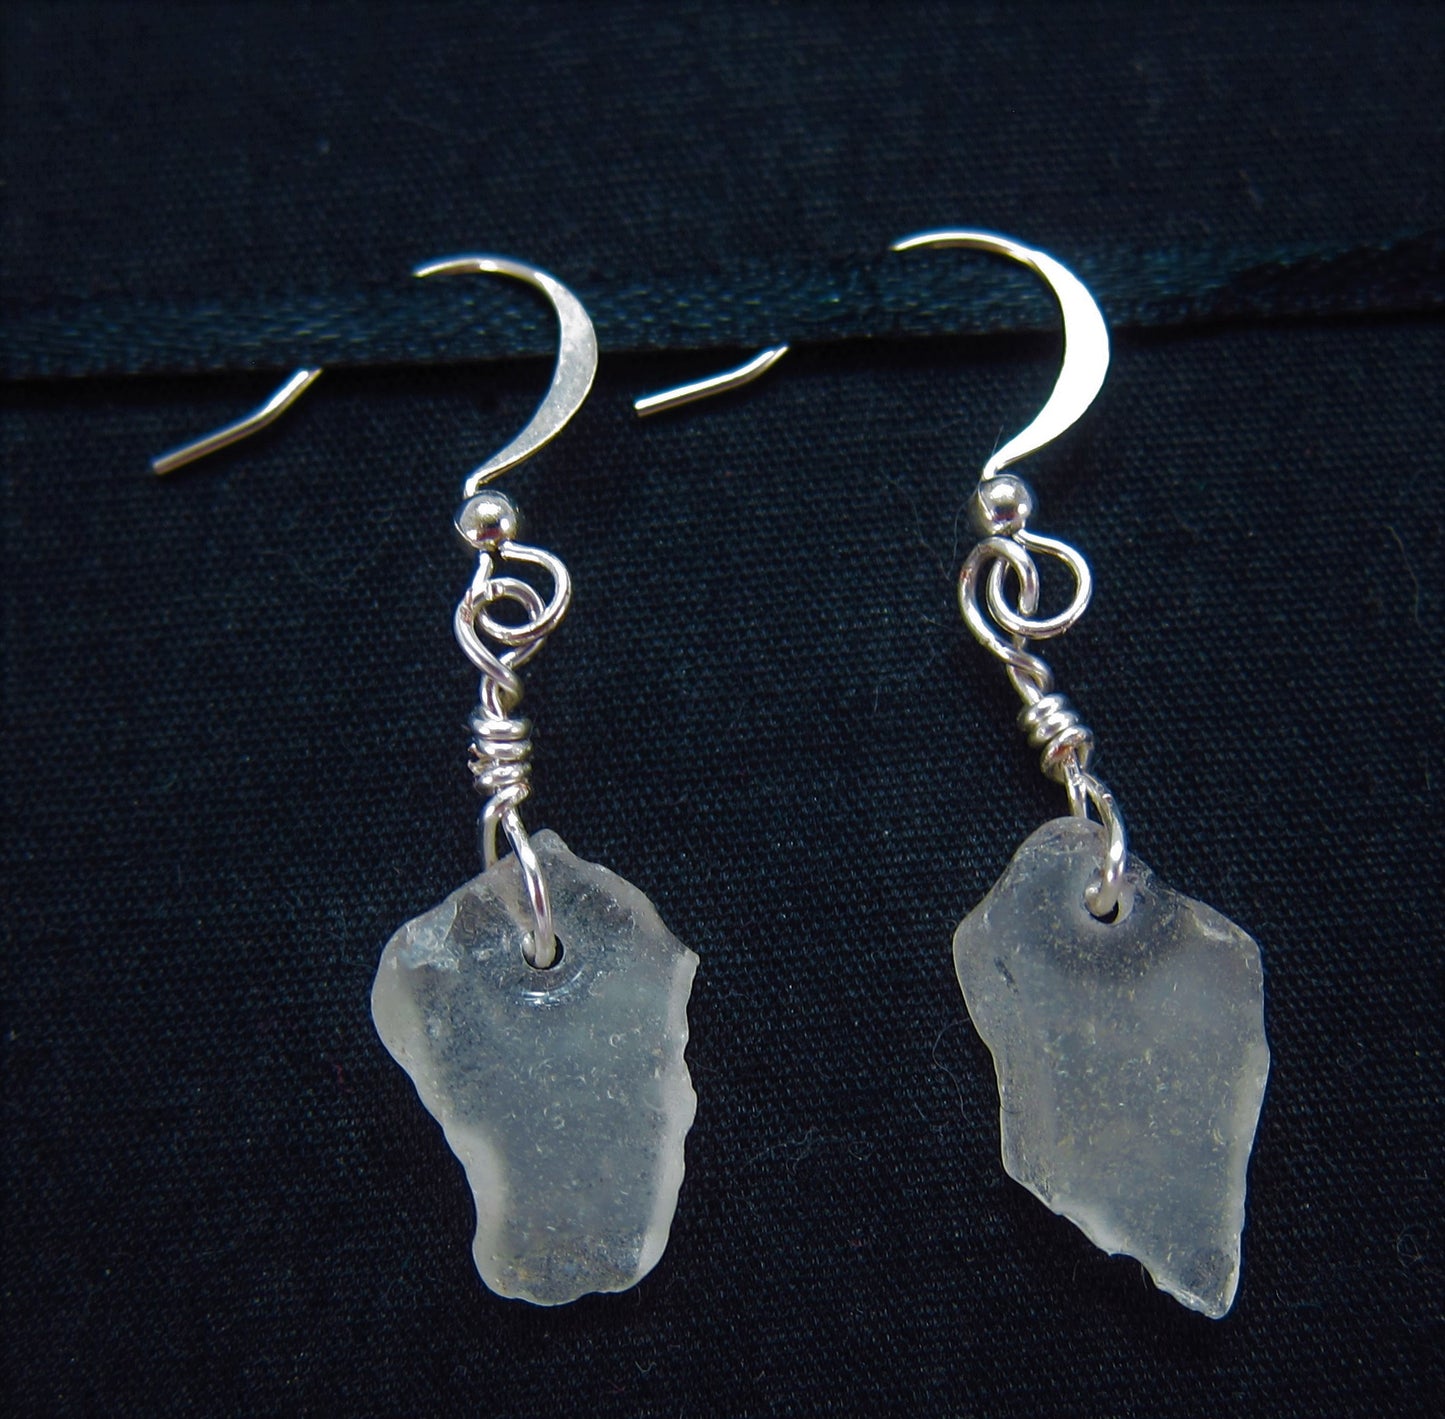 Shoreline Earrings: White sea glass from the South Shore of Nova Scotia, Canada on a hypoallergenic nickle-free hook